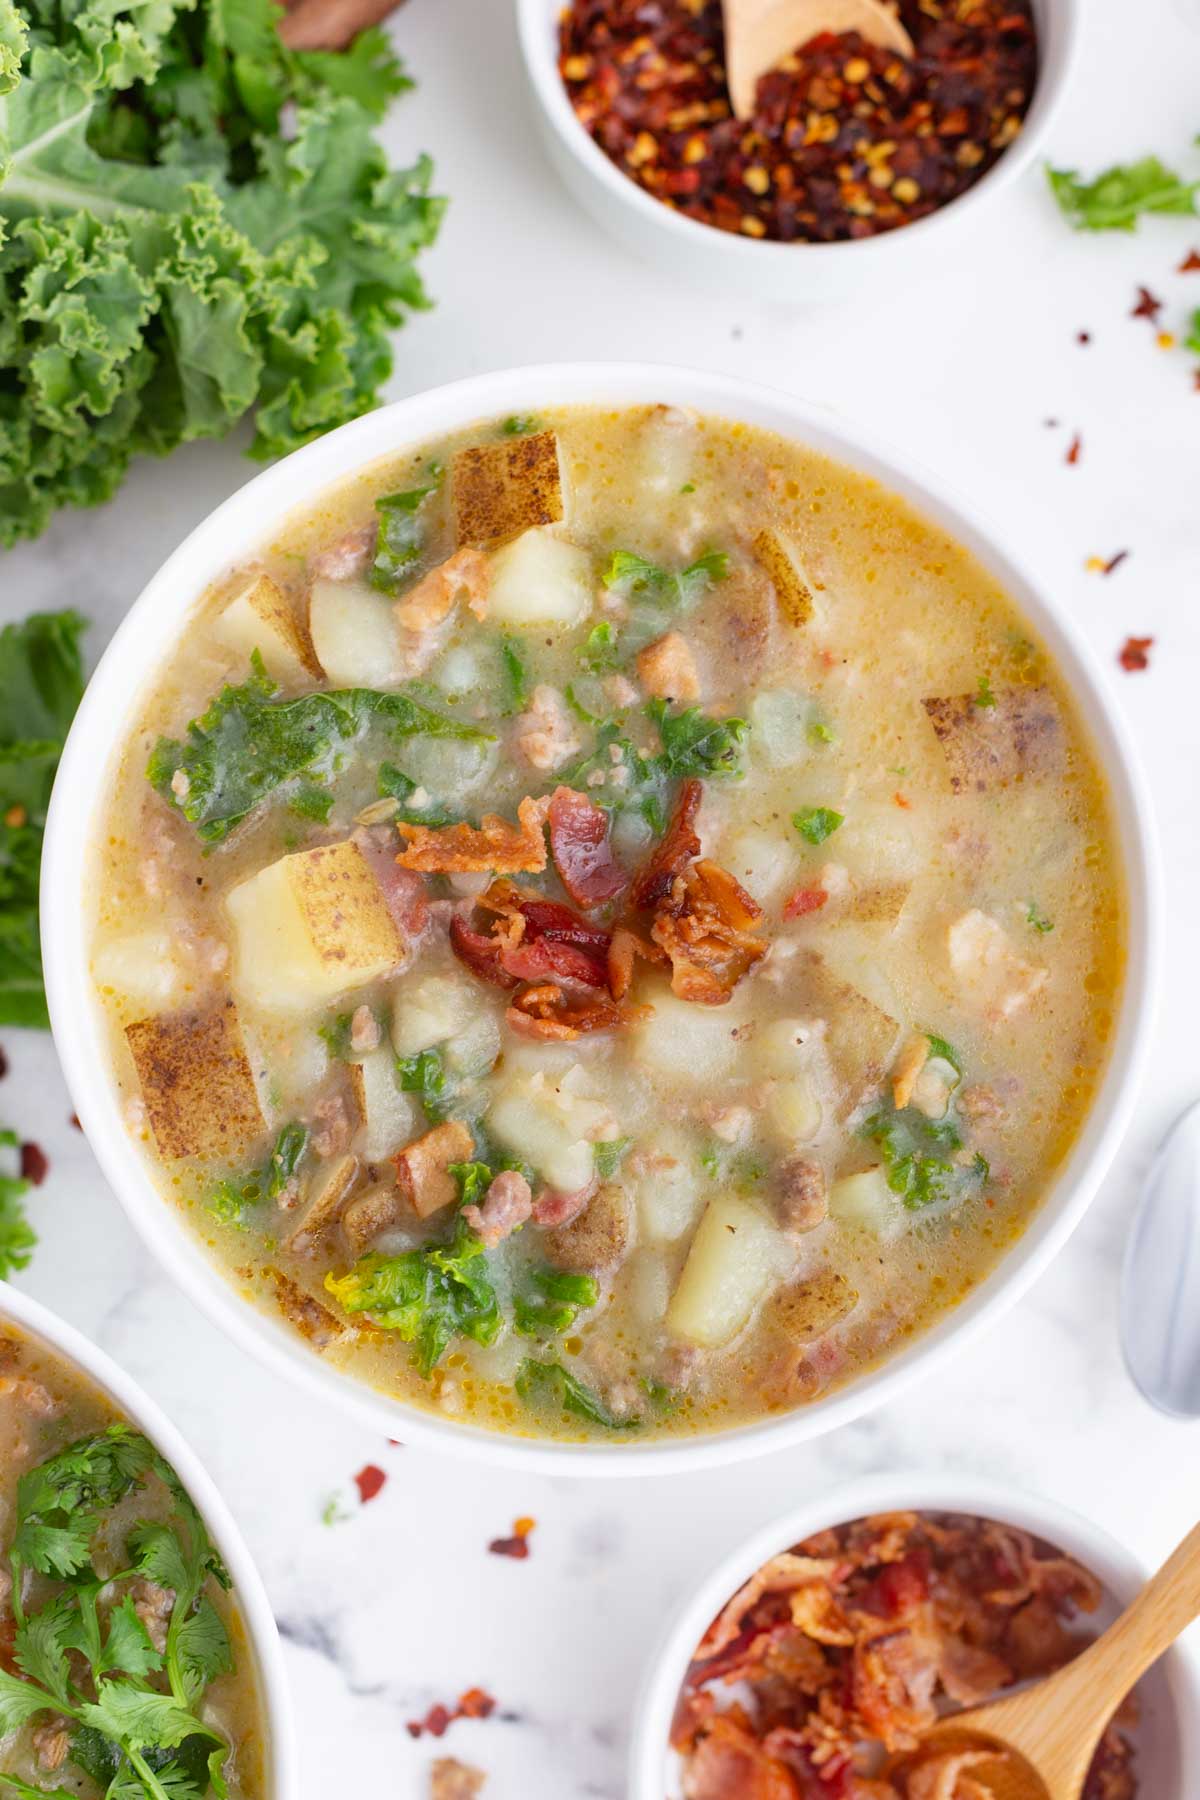 A copycat recipe for Olive Garden zuppa toscana soup in a white bowl with a hand holding it.